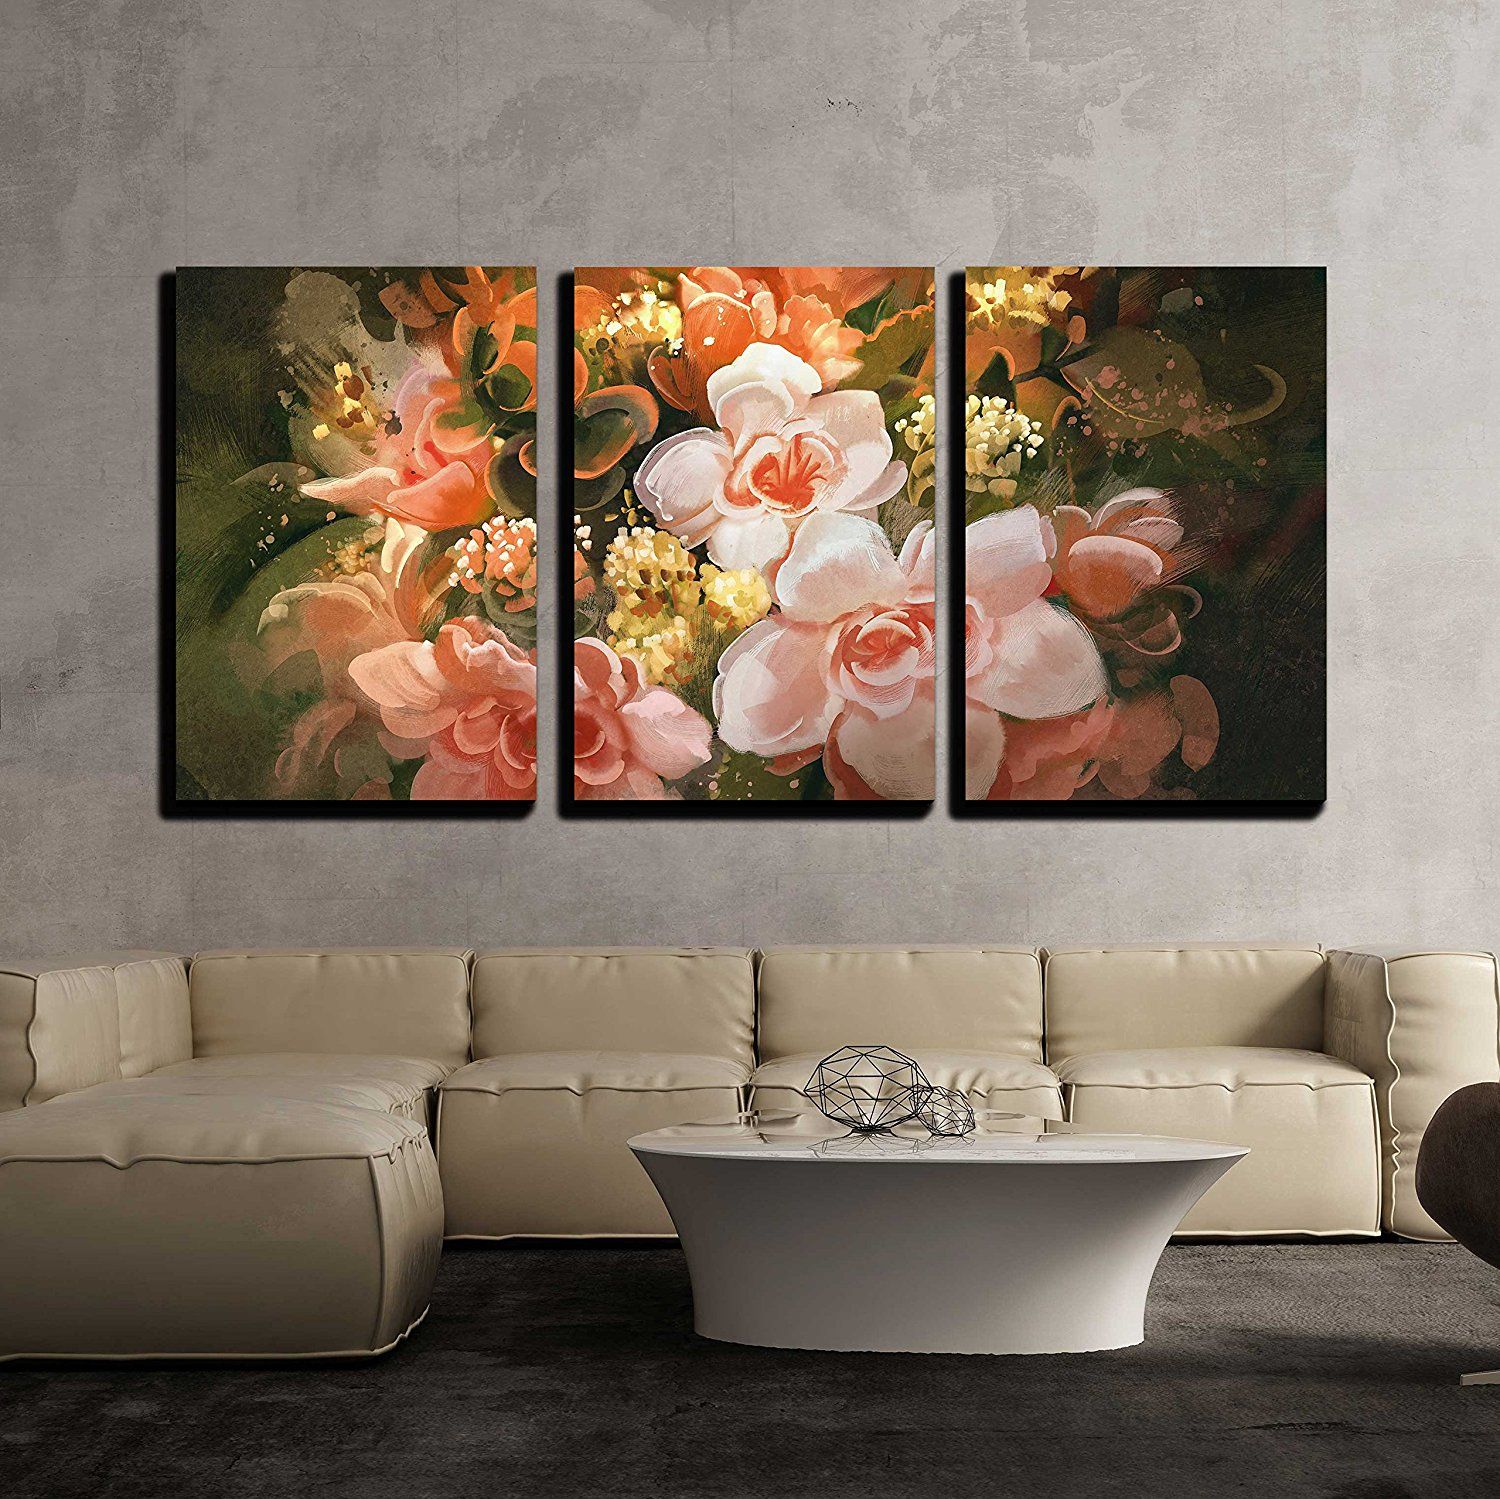 Wall26 3 Piece Canvas Wall Art – Illustration – Beautiful For Most Up To Date Flowers Wall Art (View 15 of 20)